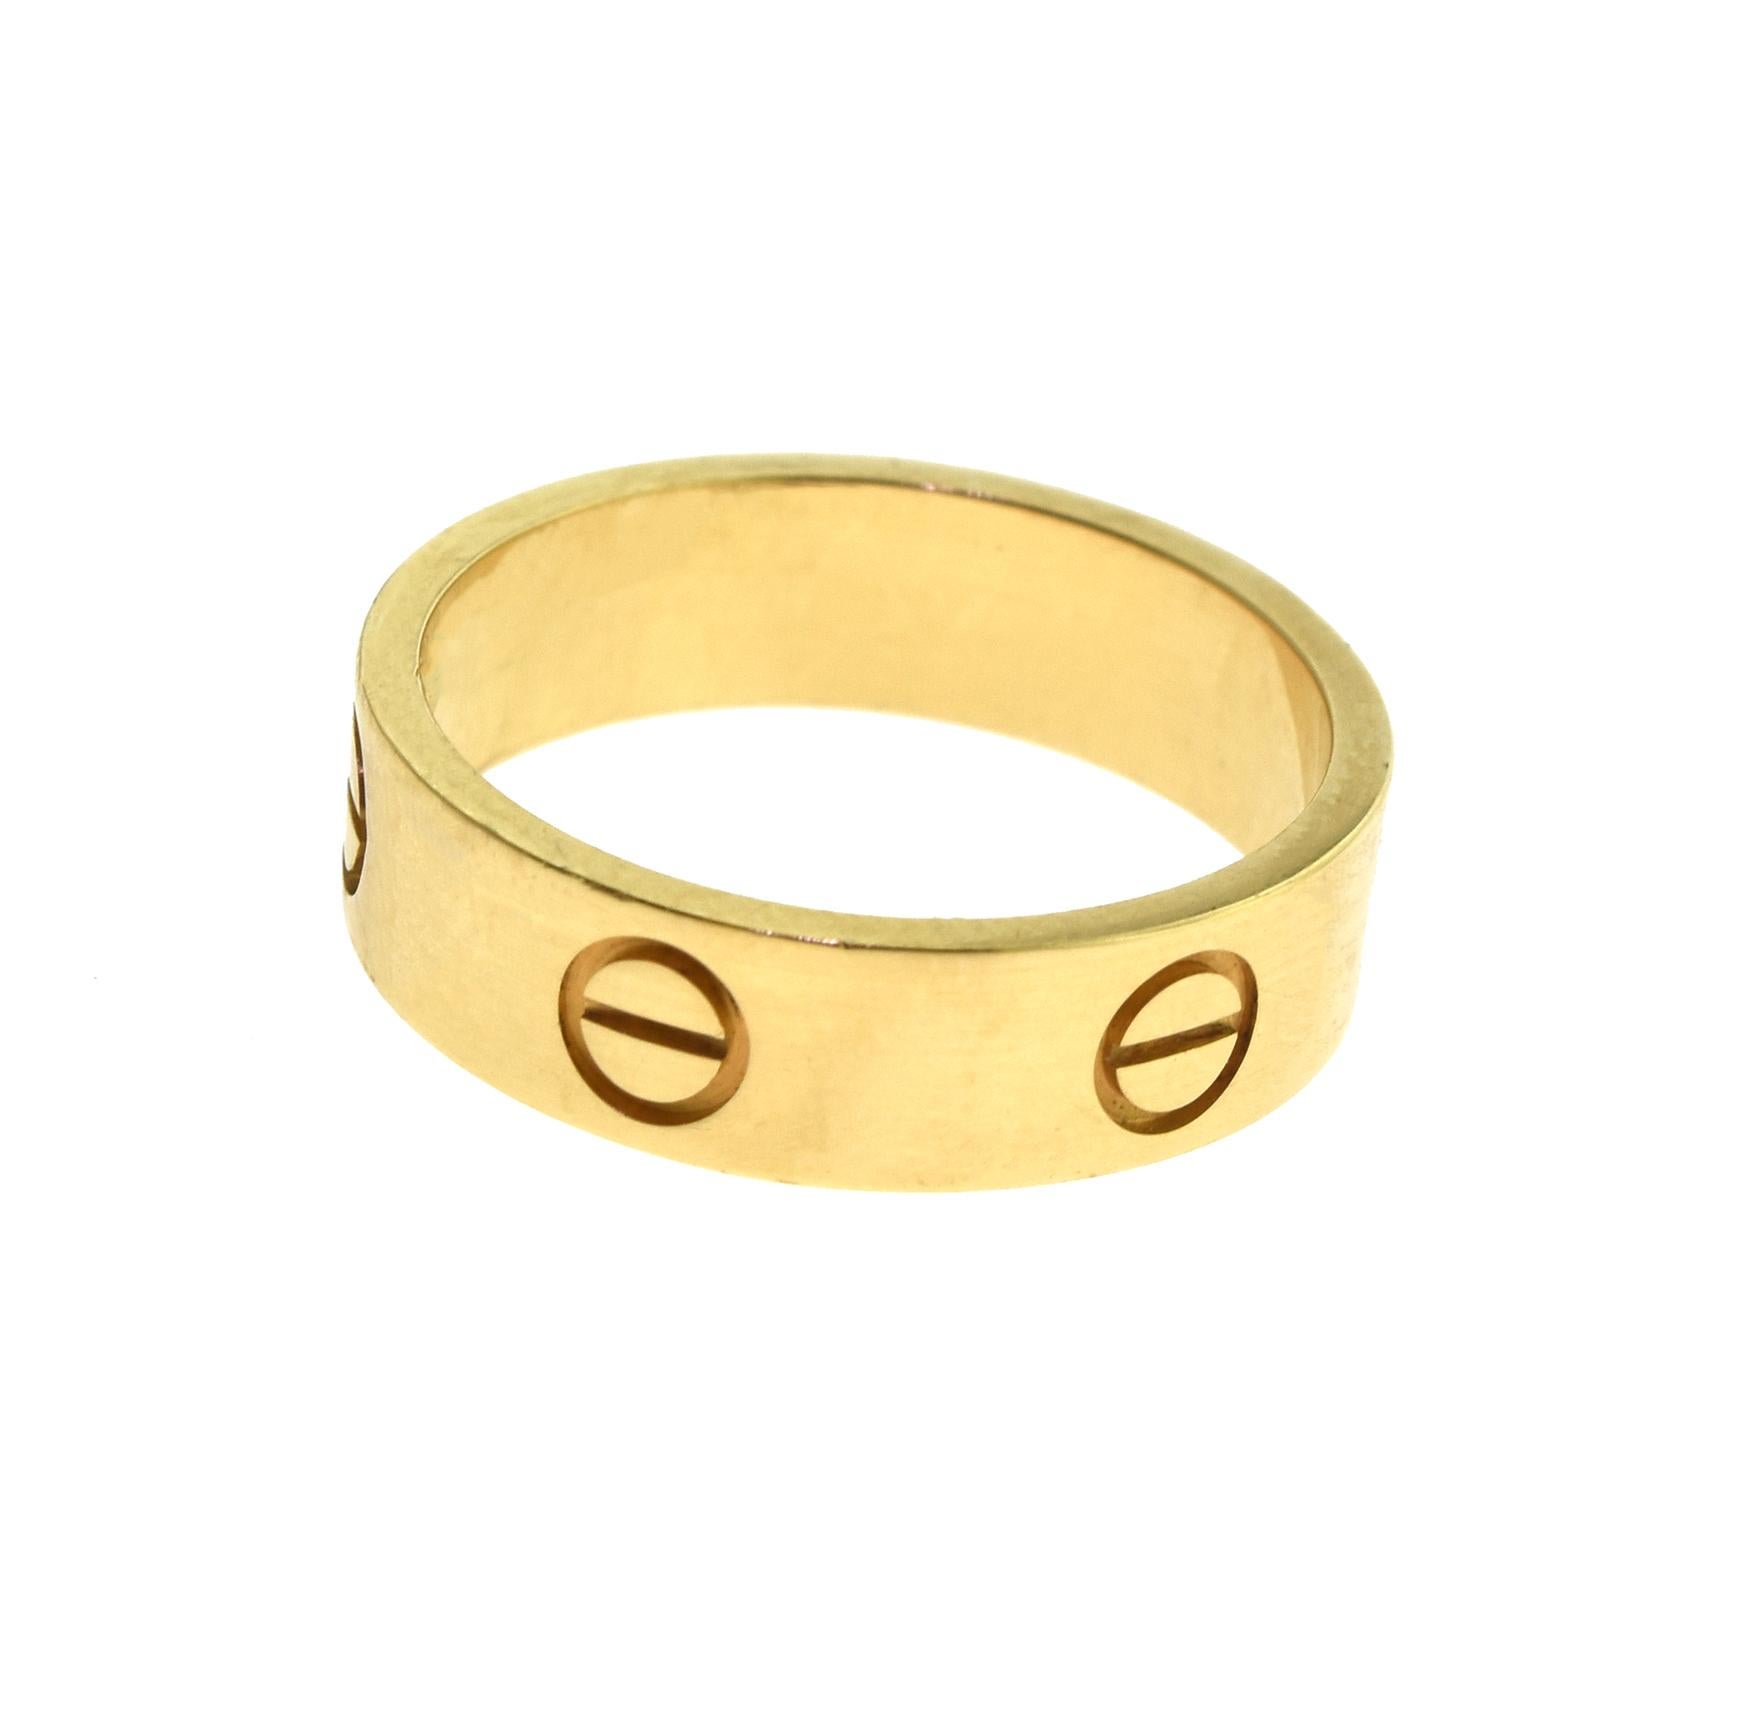 Brilliance Jewels, Miami
Questions? Call Us Anytime!
786,482,8100

Ring Size: 55 (euro) ;  7 (US)

Designer: Cartier

Collection: LOVE

Style: Band Ring

Metal: Yellow Gold

Metal Purity: 18k

Band Width: 5.53 mm

Total Item Weight (grams):